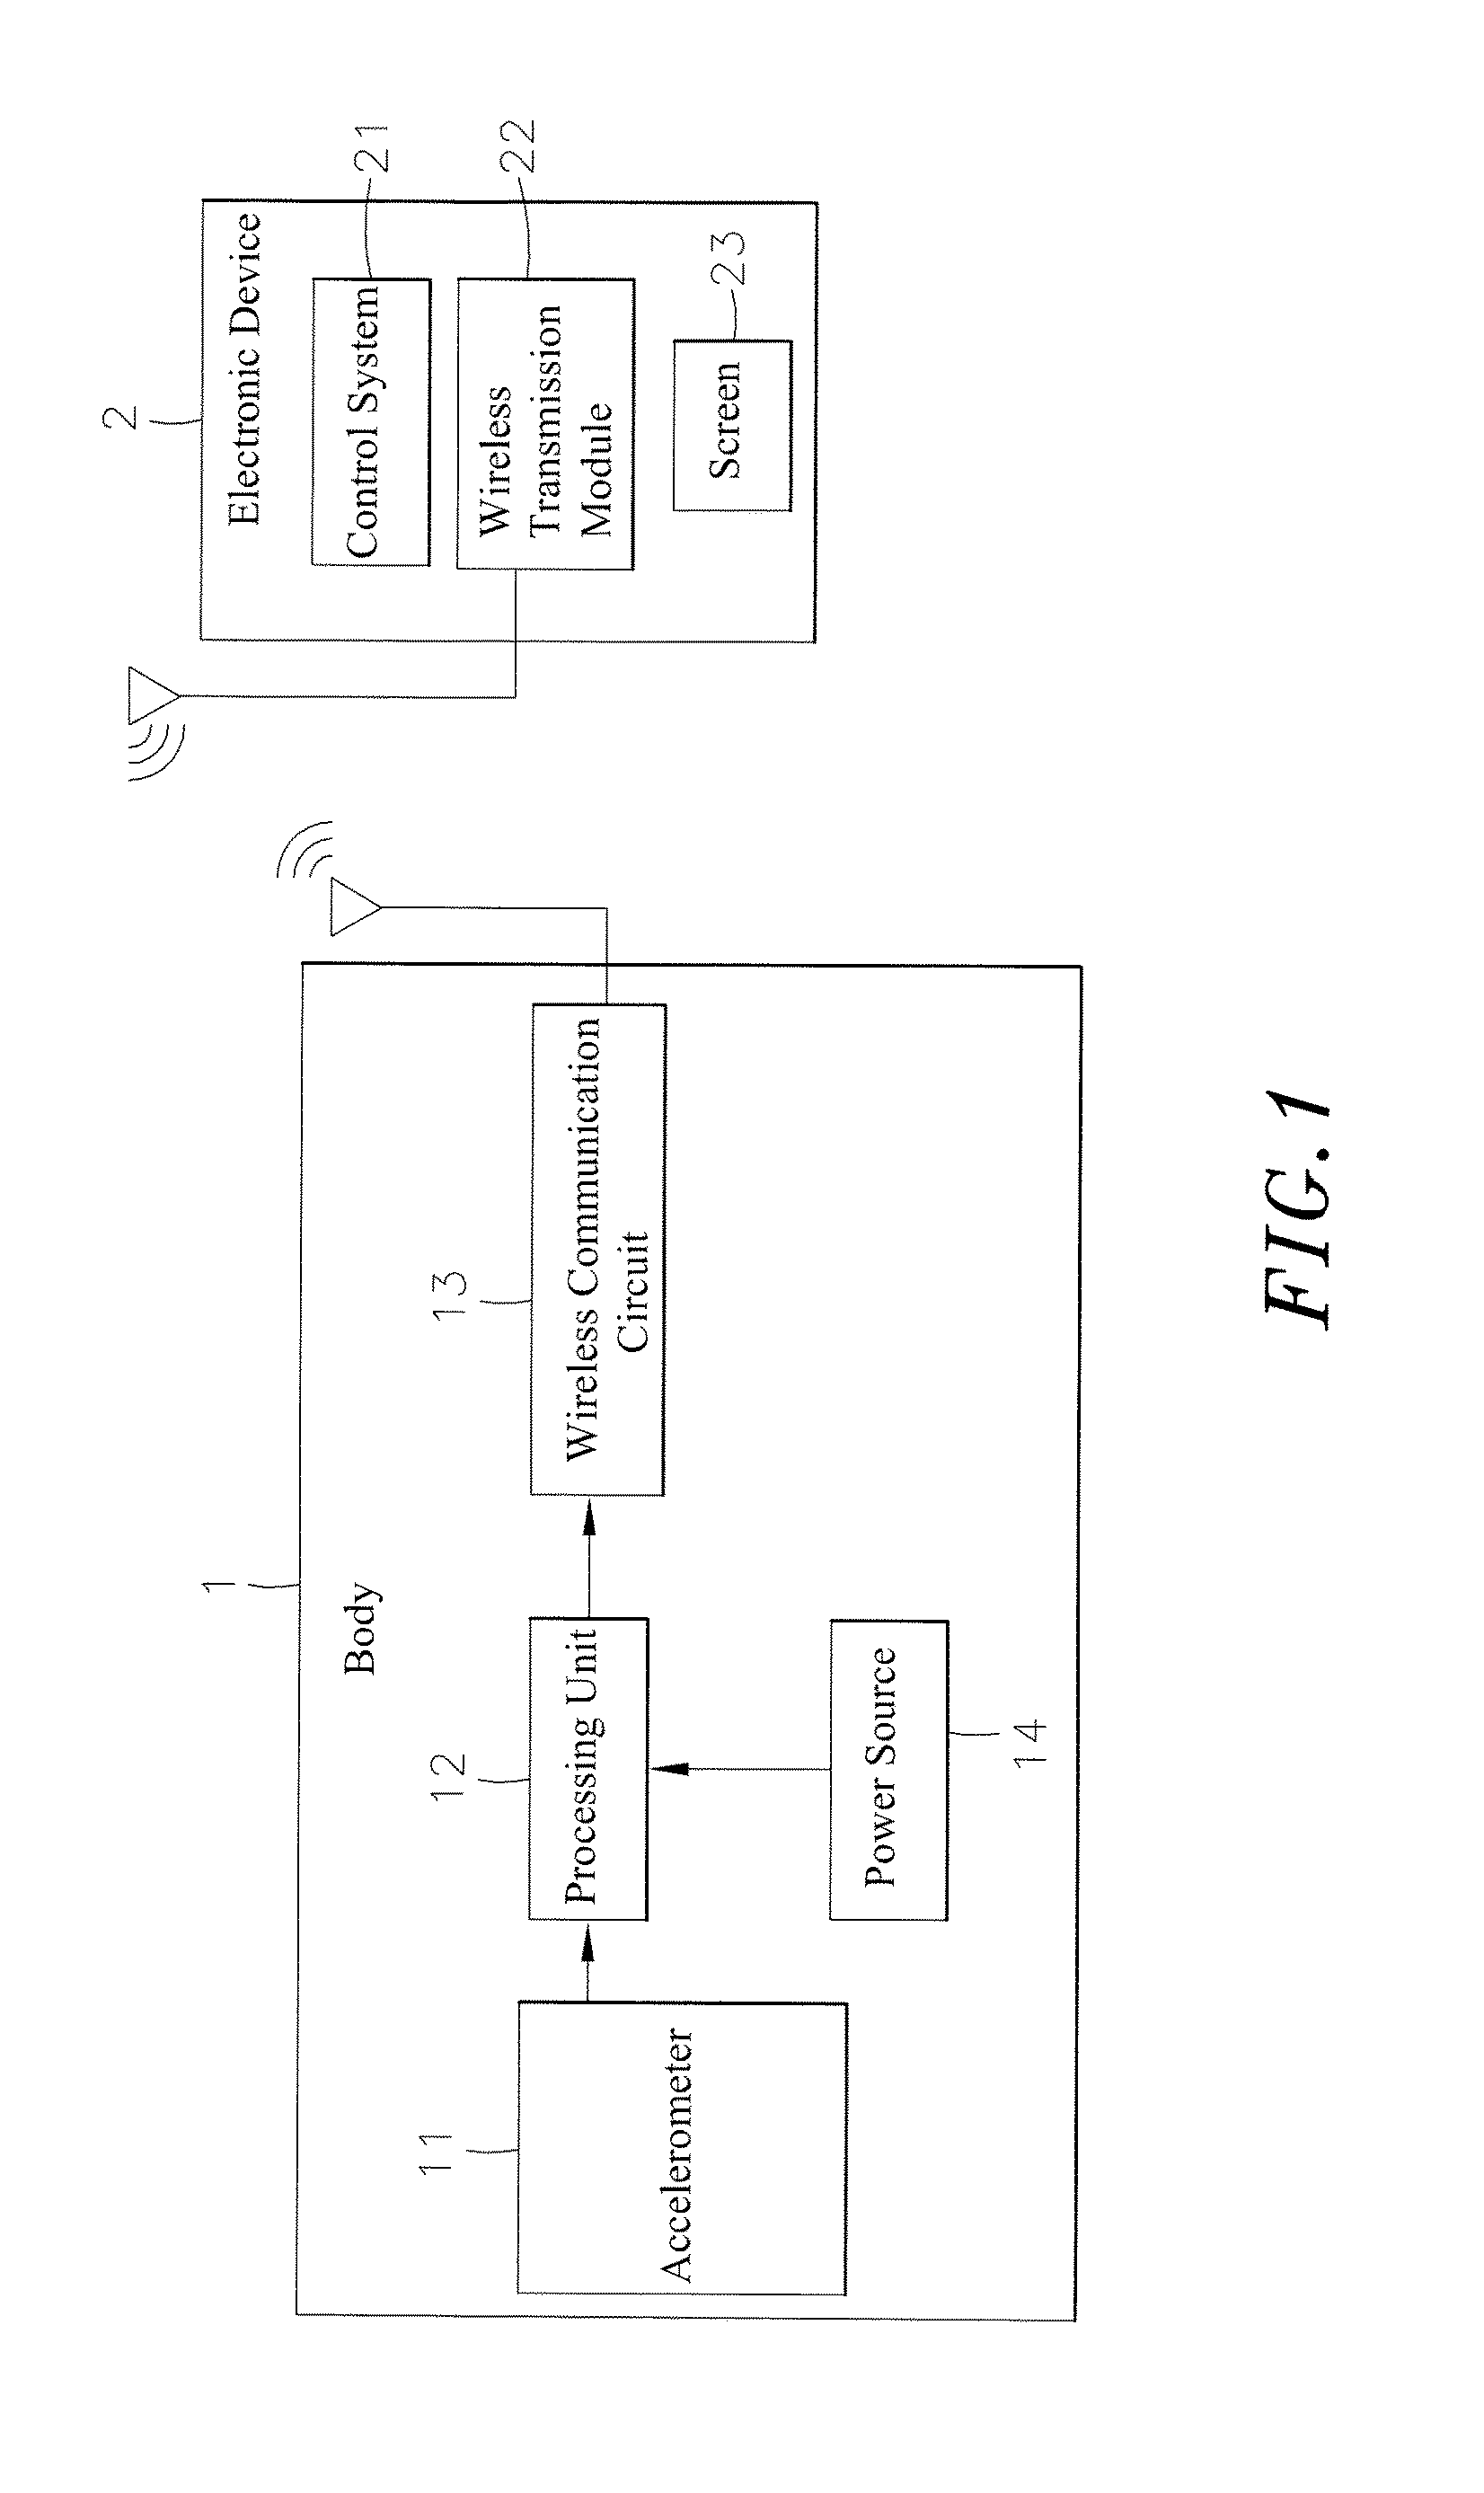 Method for Detecting Bicycle Pedaling Frequencies